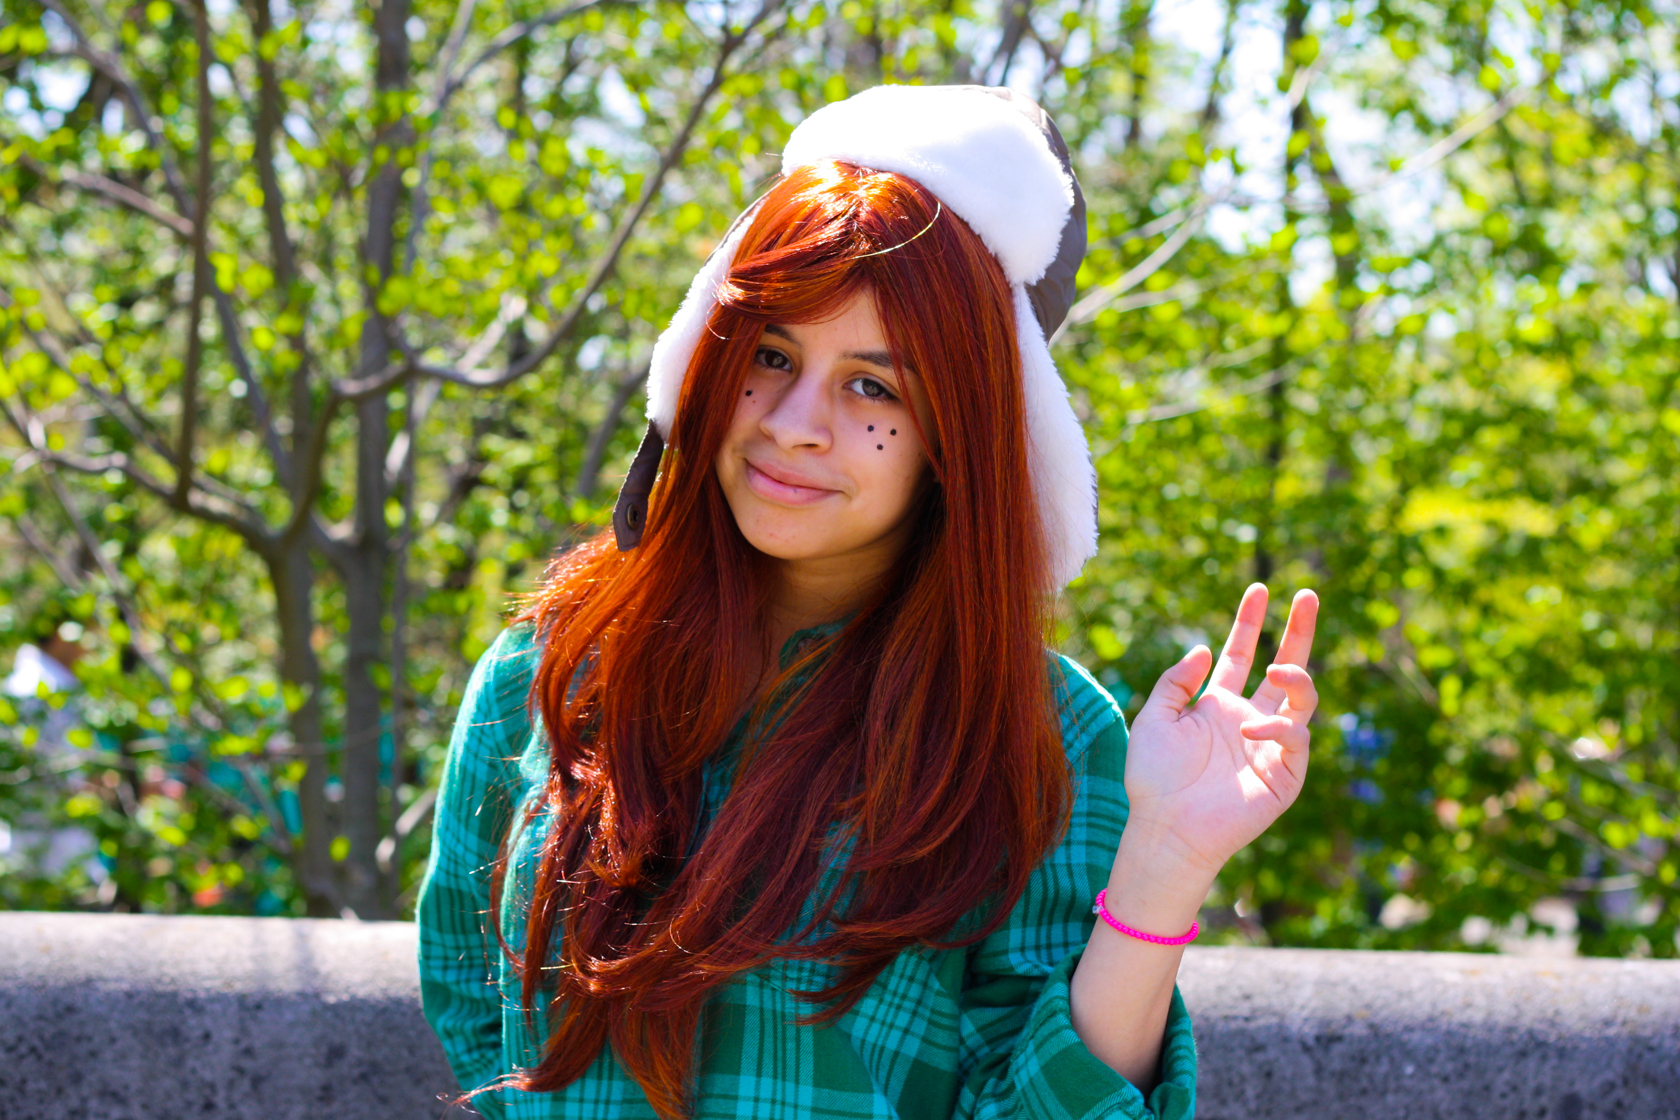 Wendy Corduroy (Gravity Falls) cosplayed by Sephie.